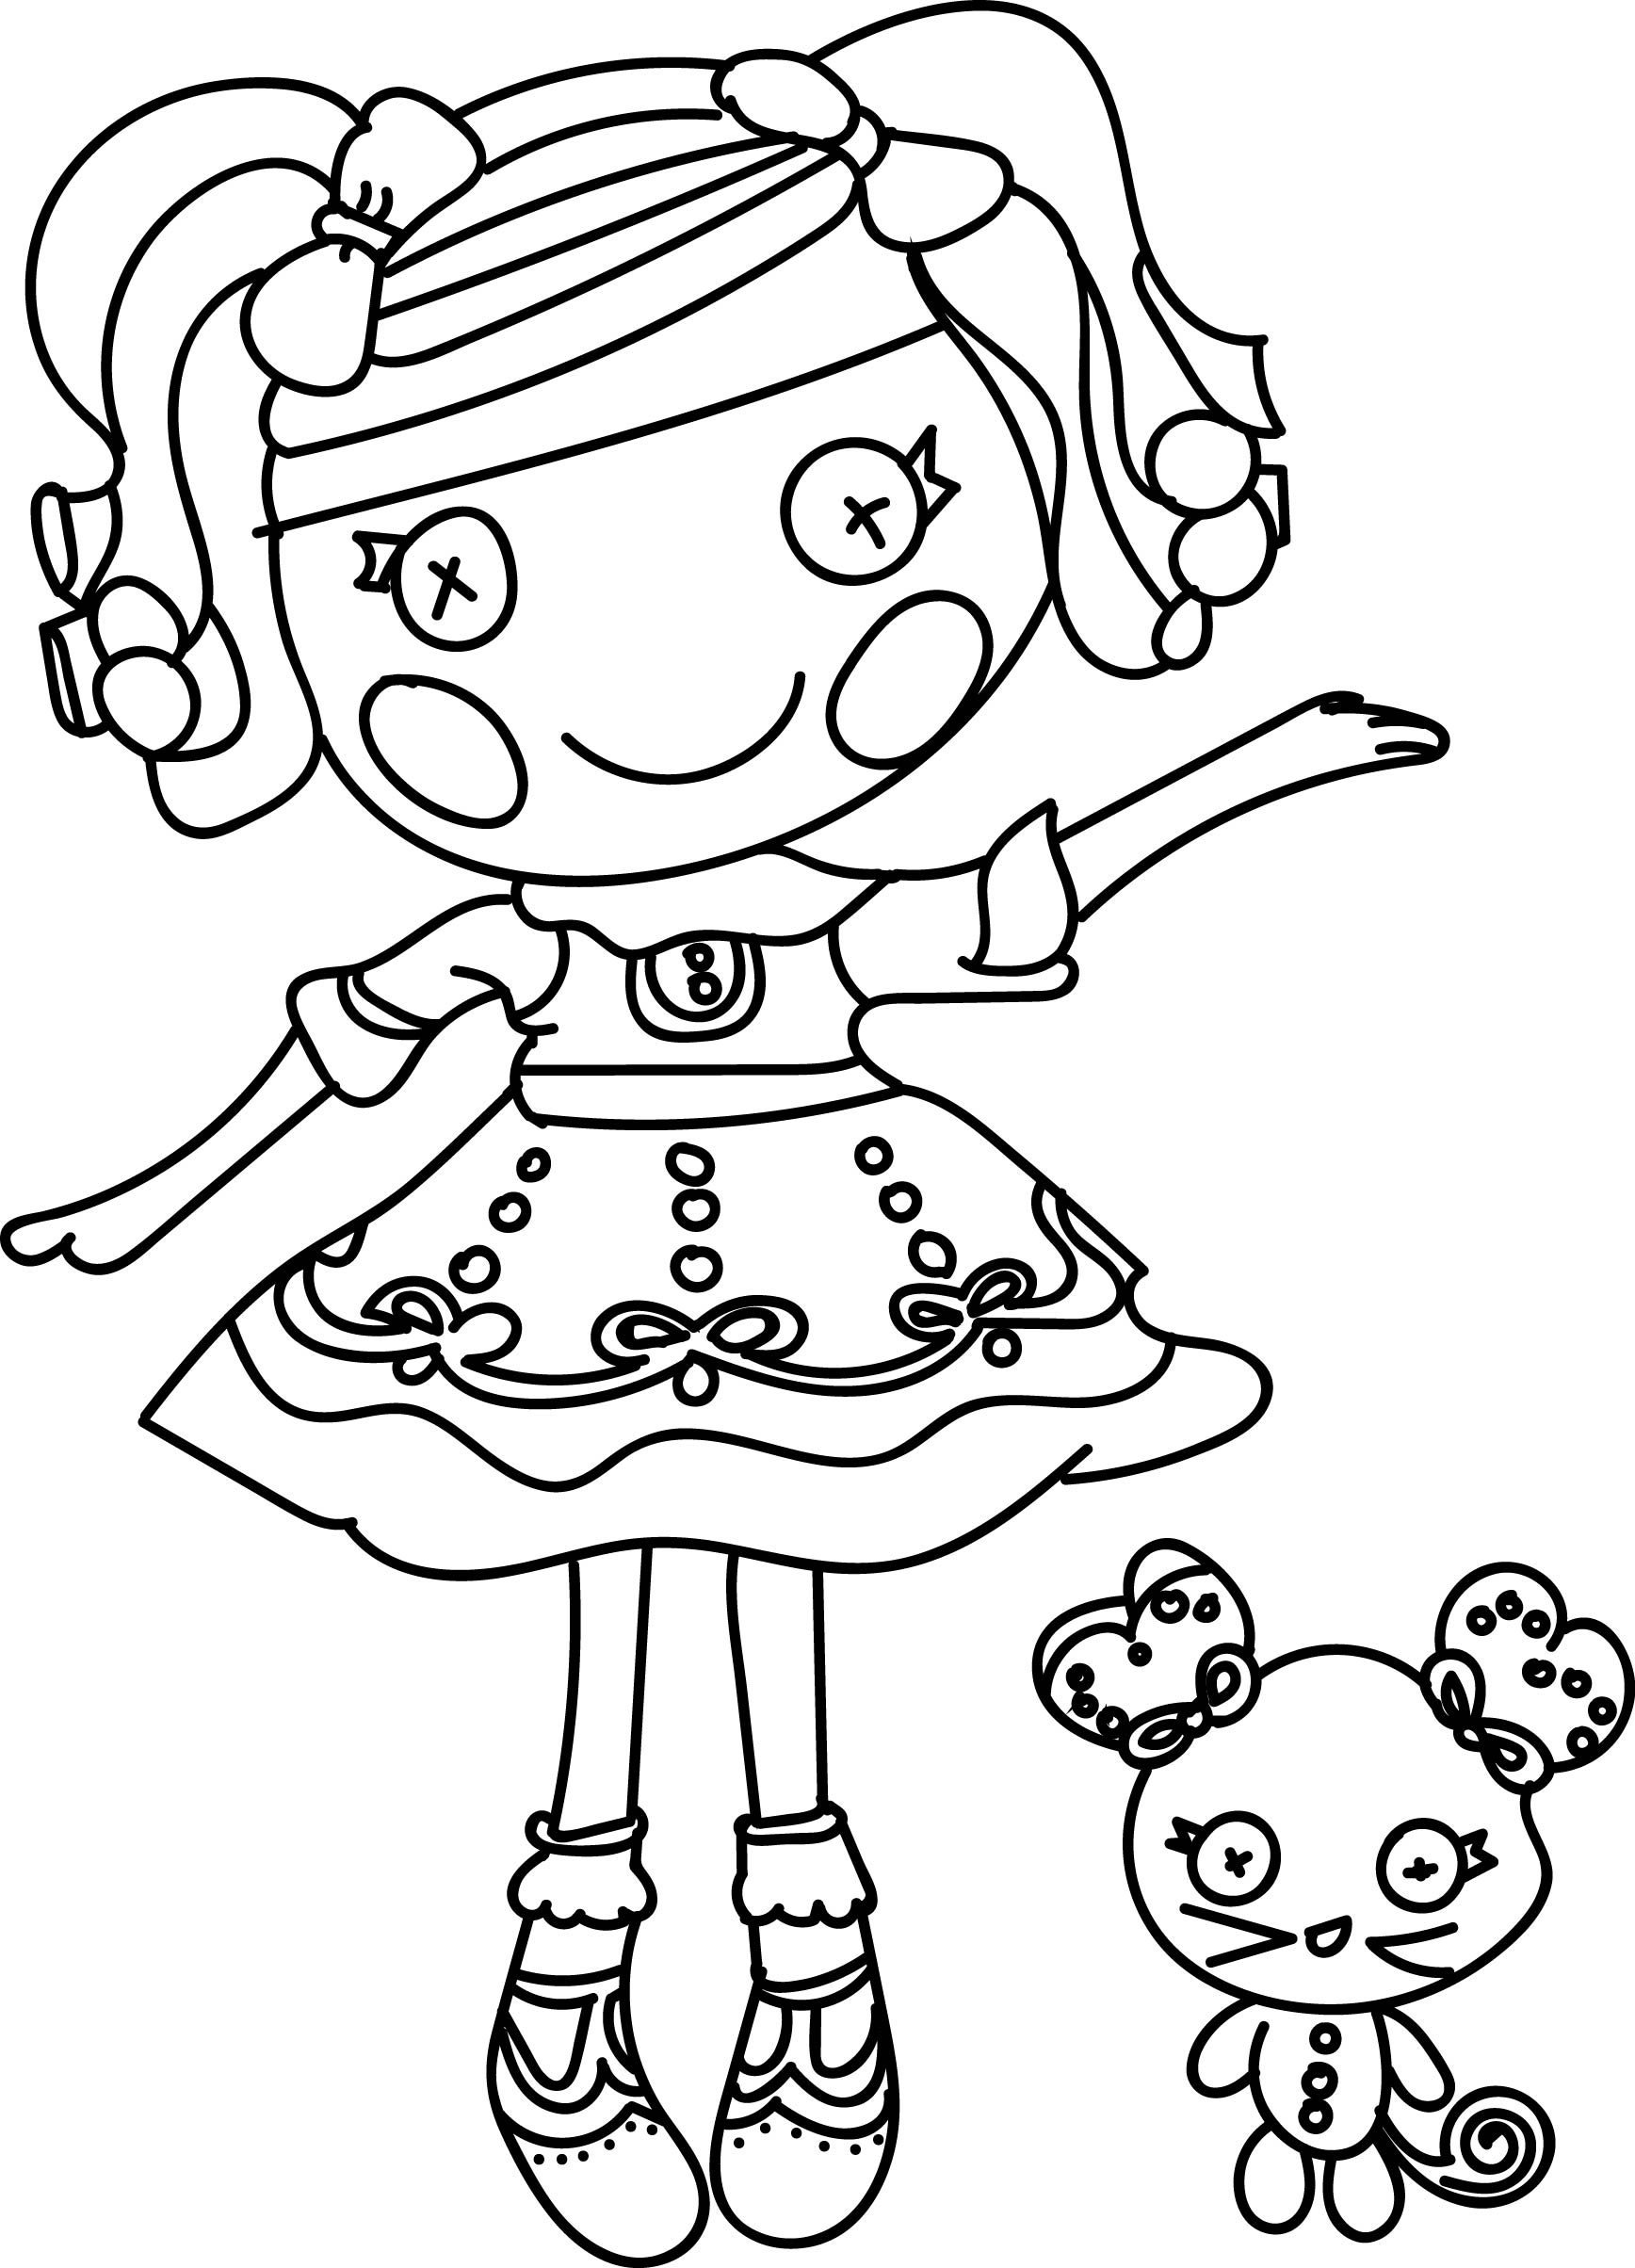 992 Animal Lalaloopsy Coloring Pages with Printable